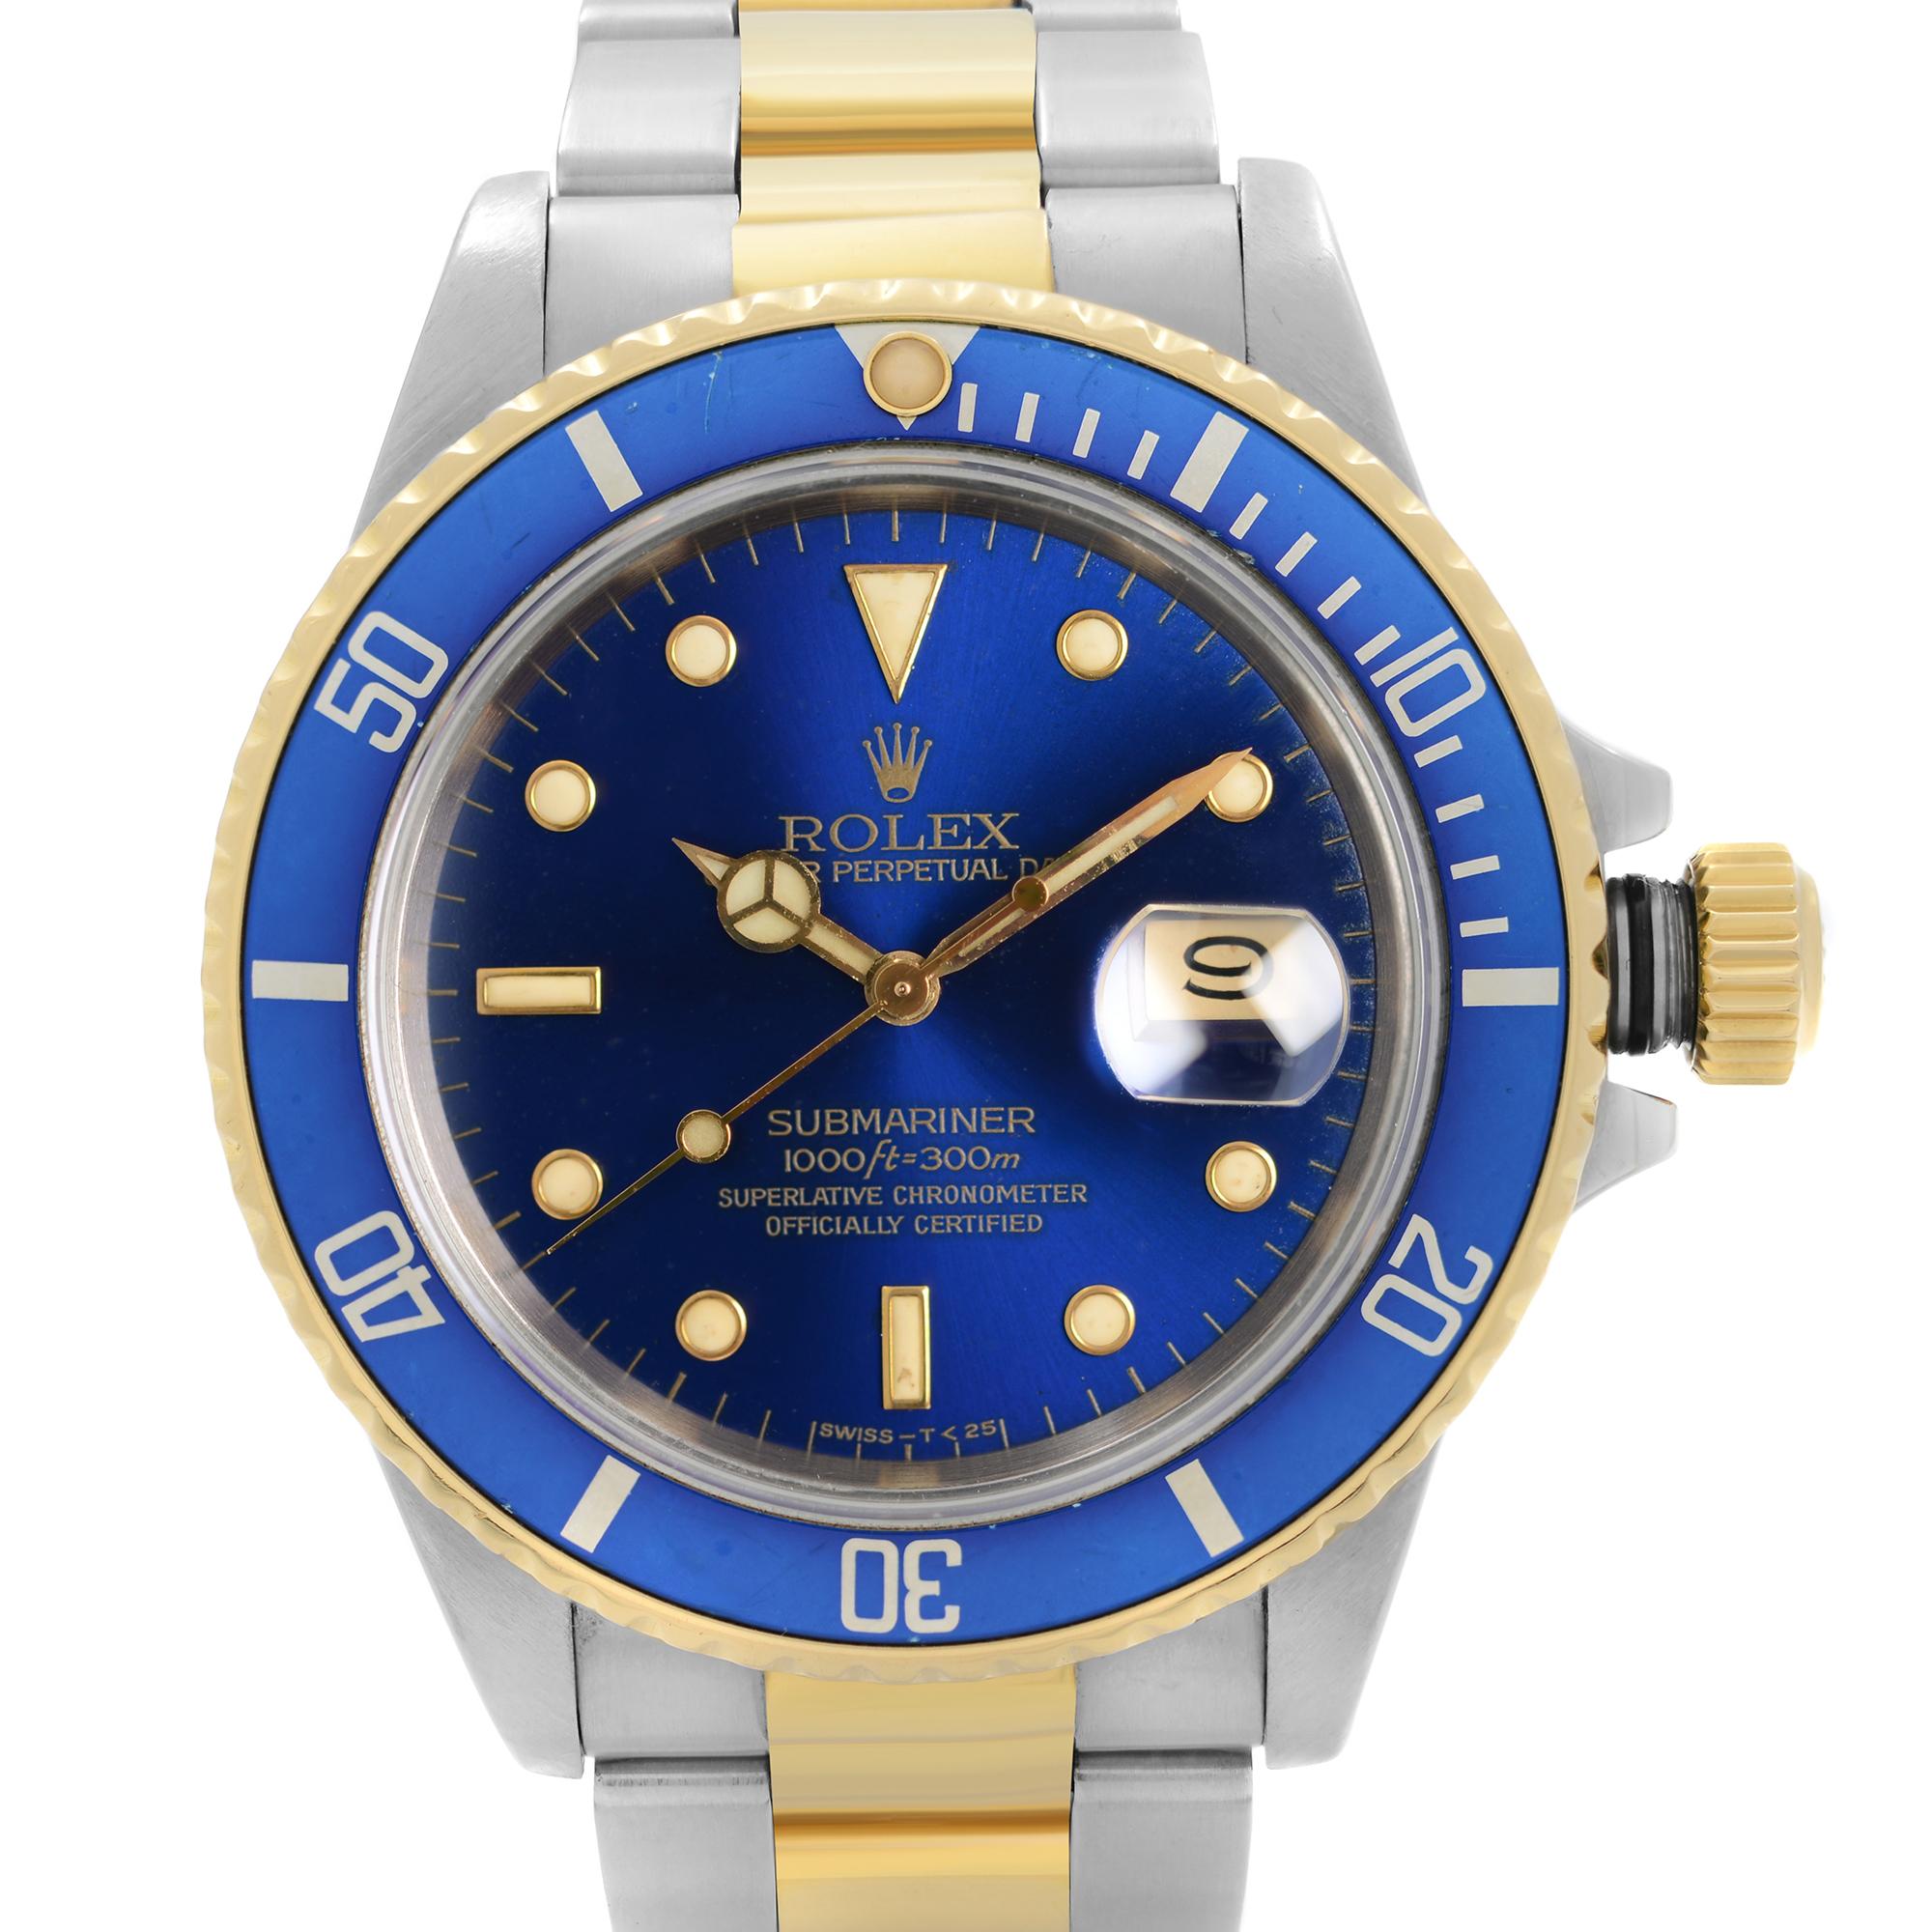 This pre-owned Rolex Submariner 16803 is a beautiful men's timepiece that is powered by an automatic movement which is cased in a stainless steel case. It has a collectible transitional blue/violet dial, round shape face, date dial and has hand